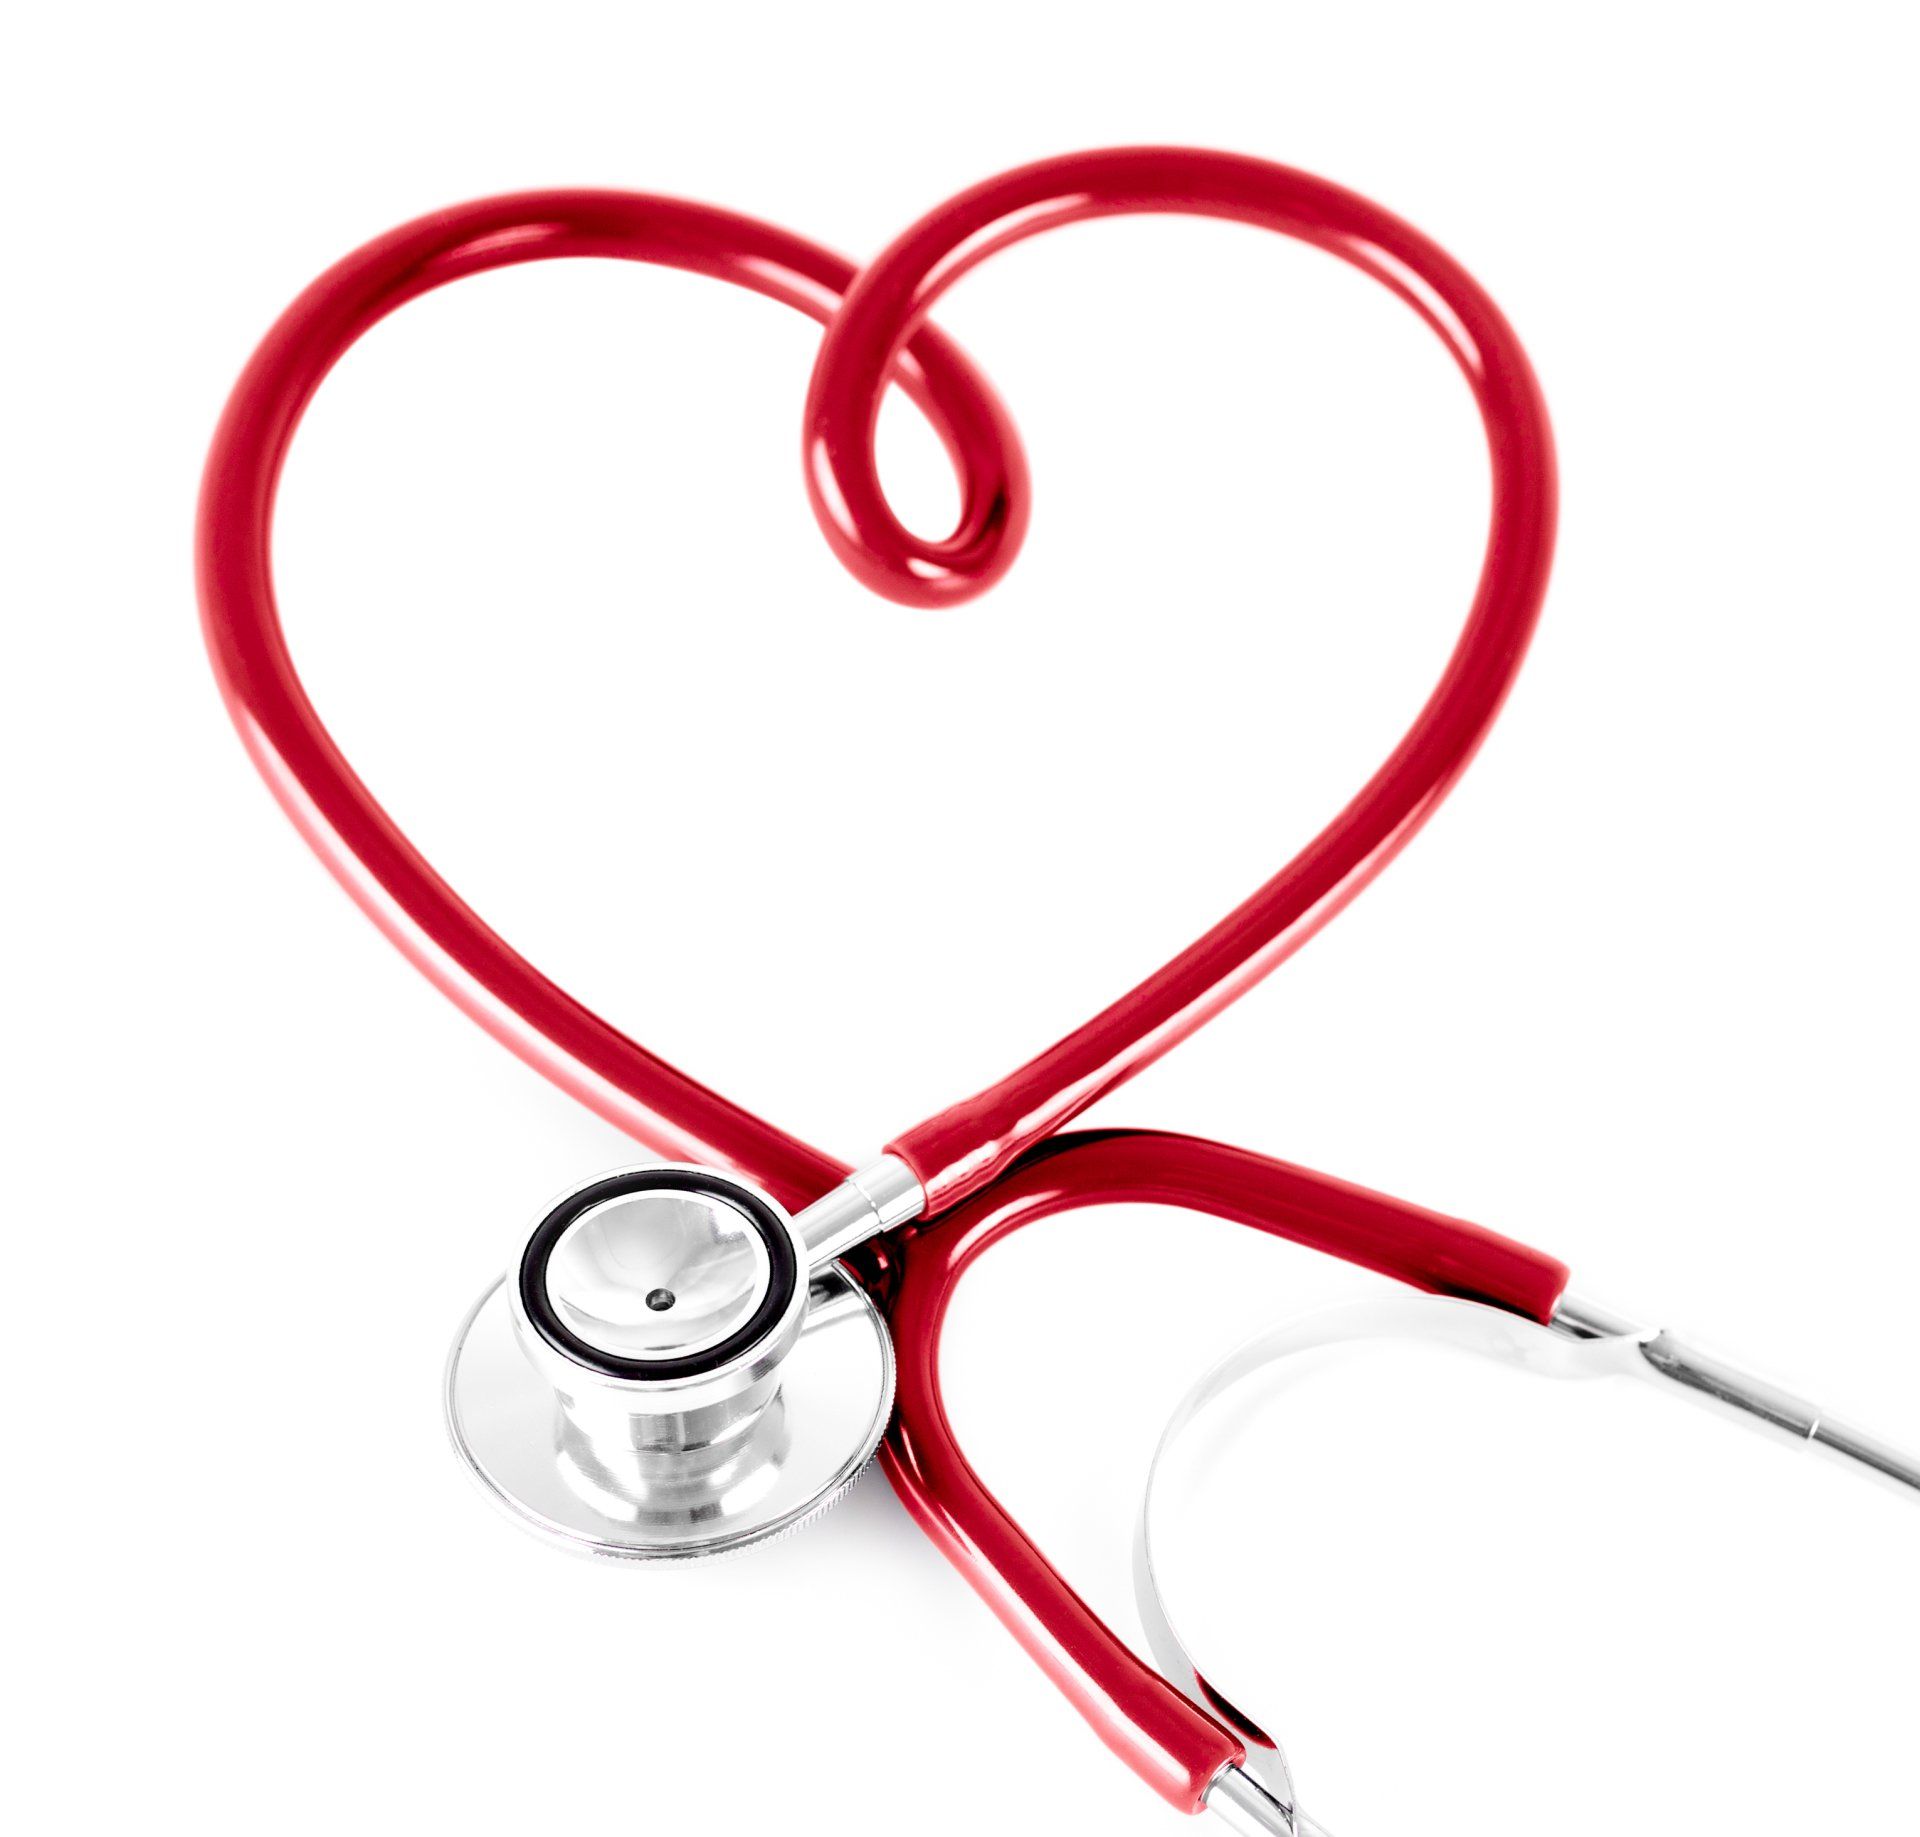 Stethoscope curled up into a heart shape